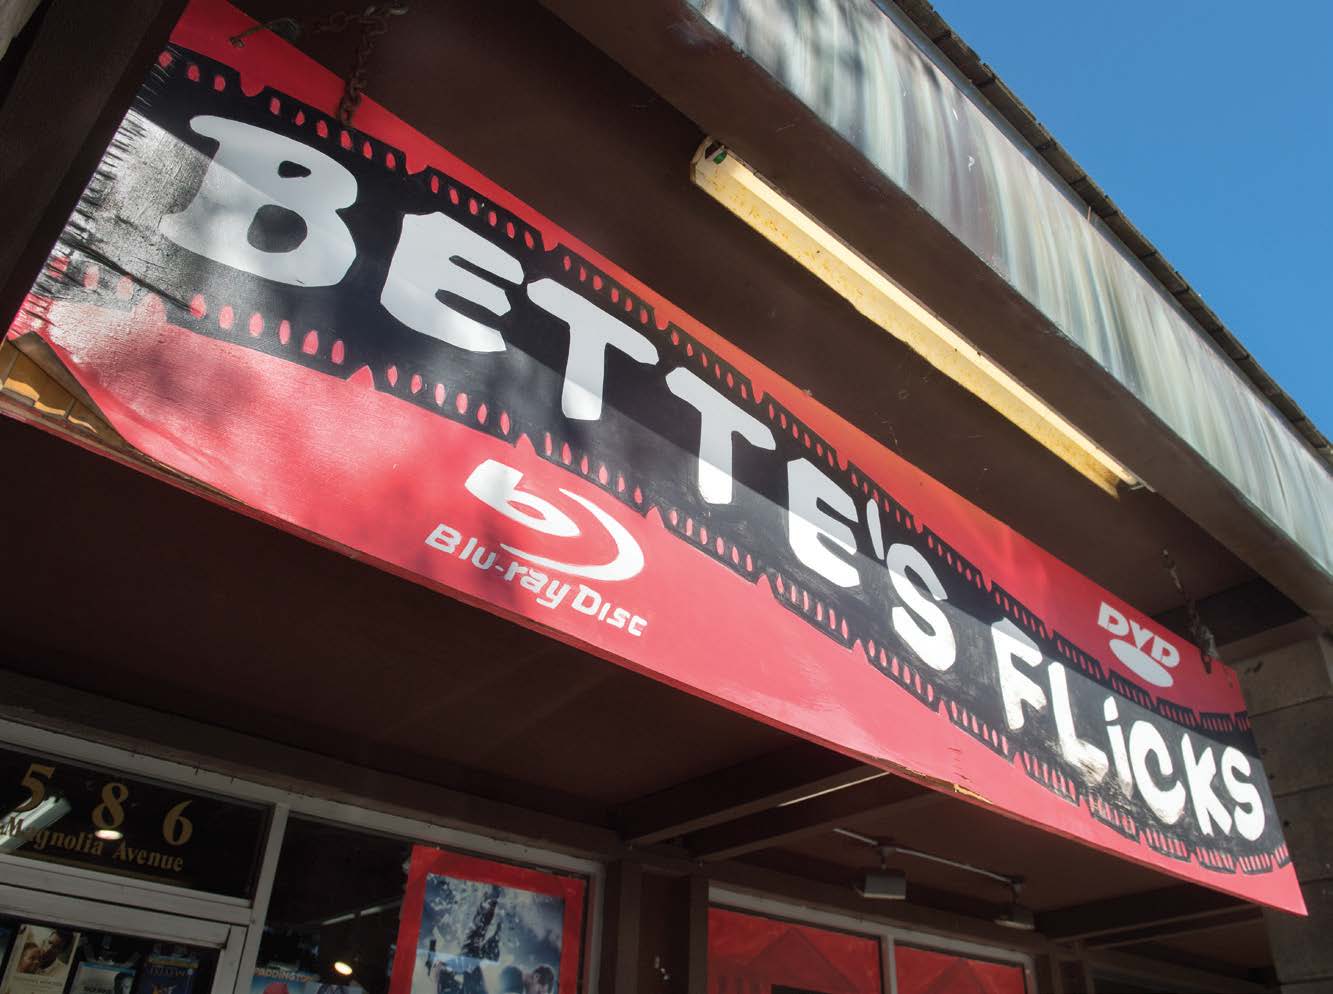 The old location of Bette's Flicks